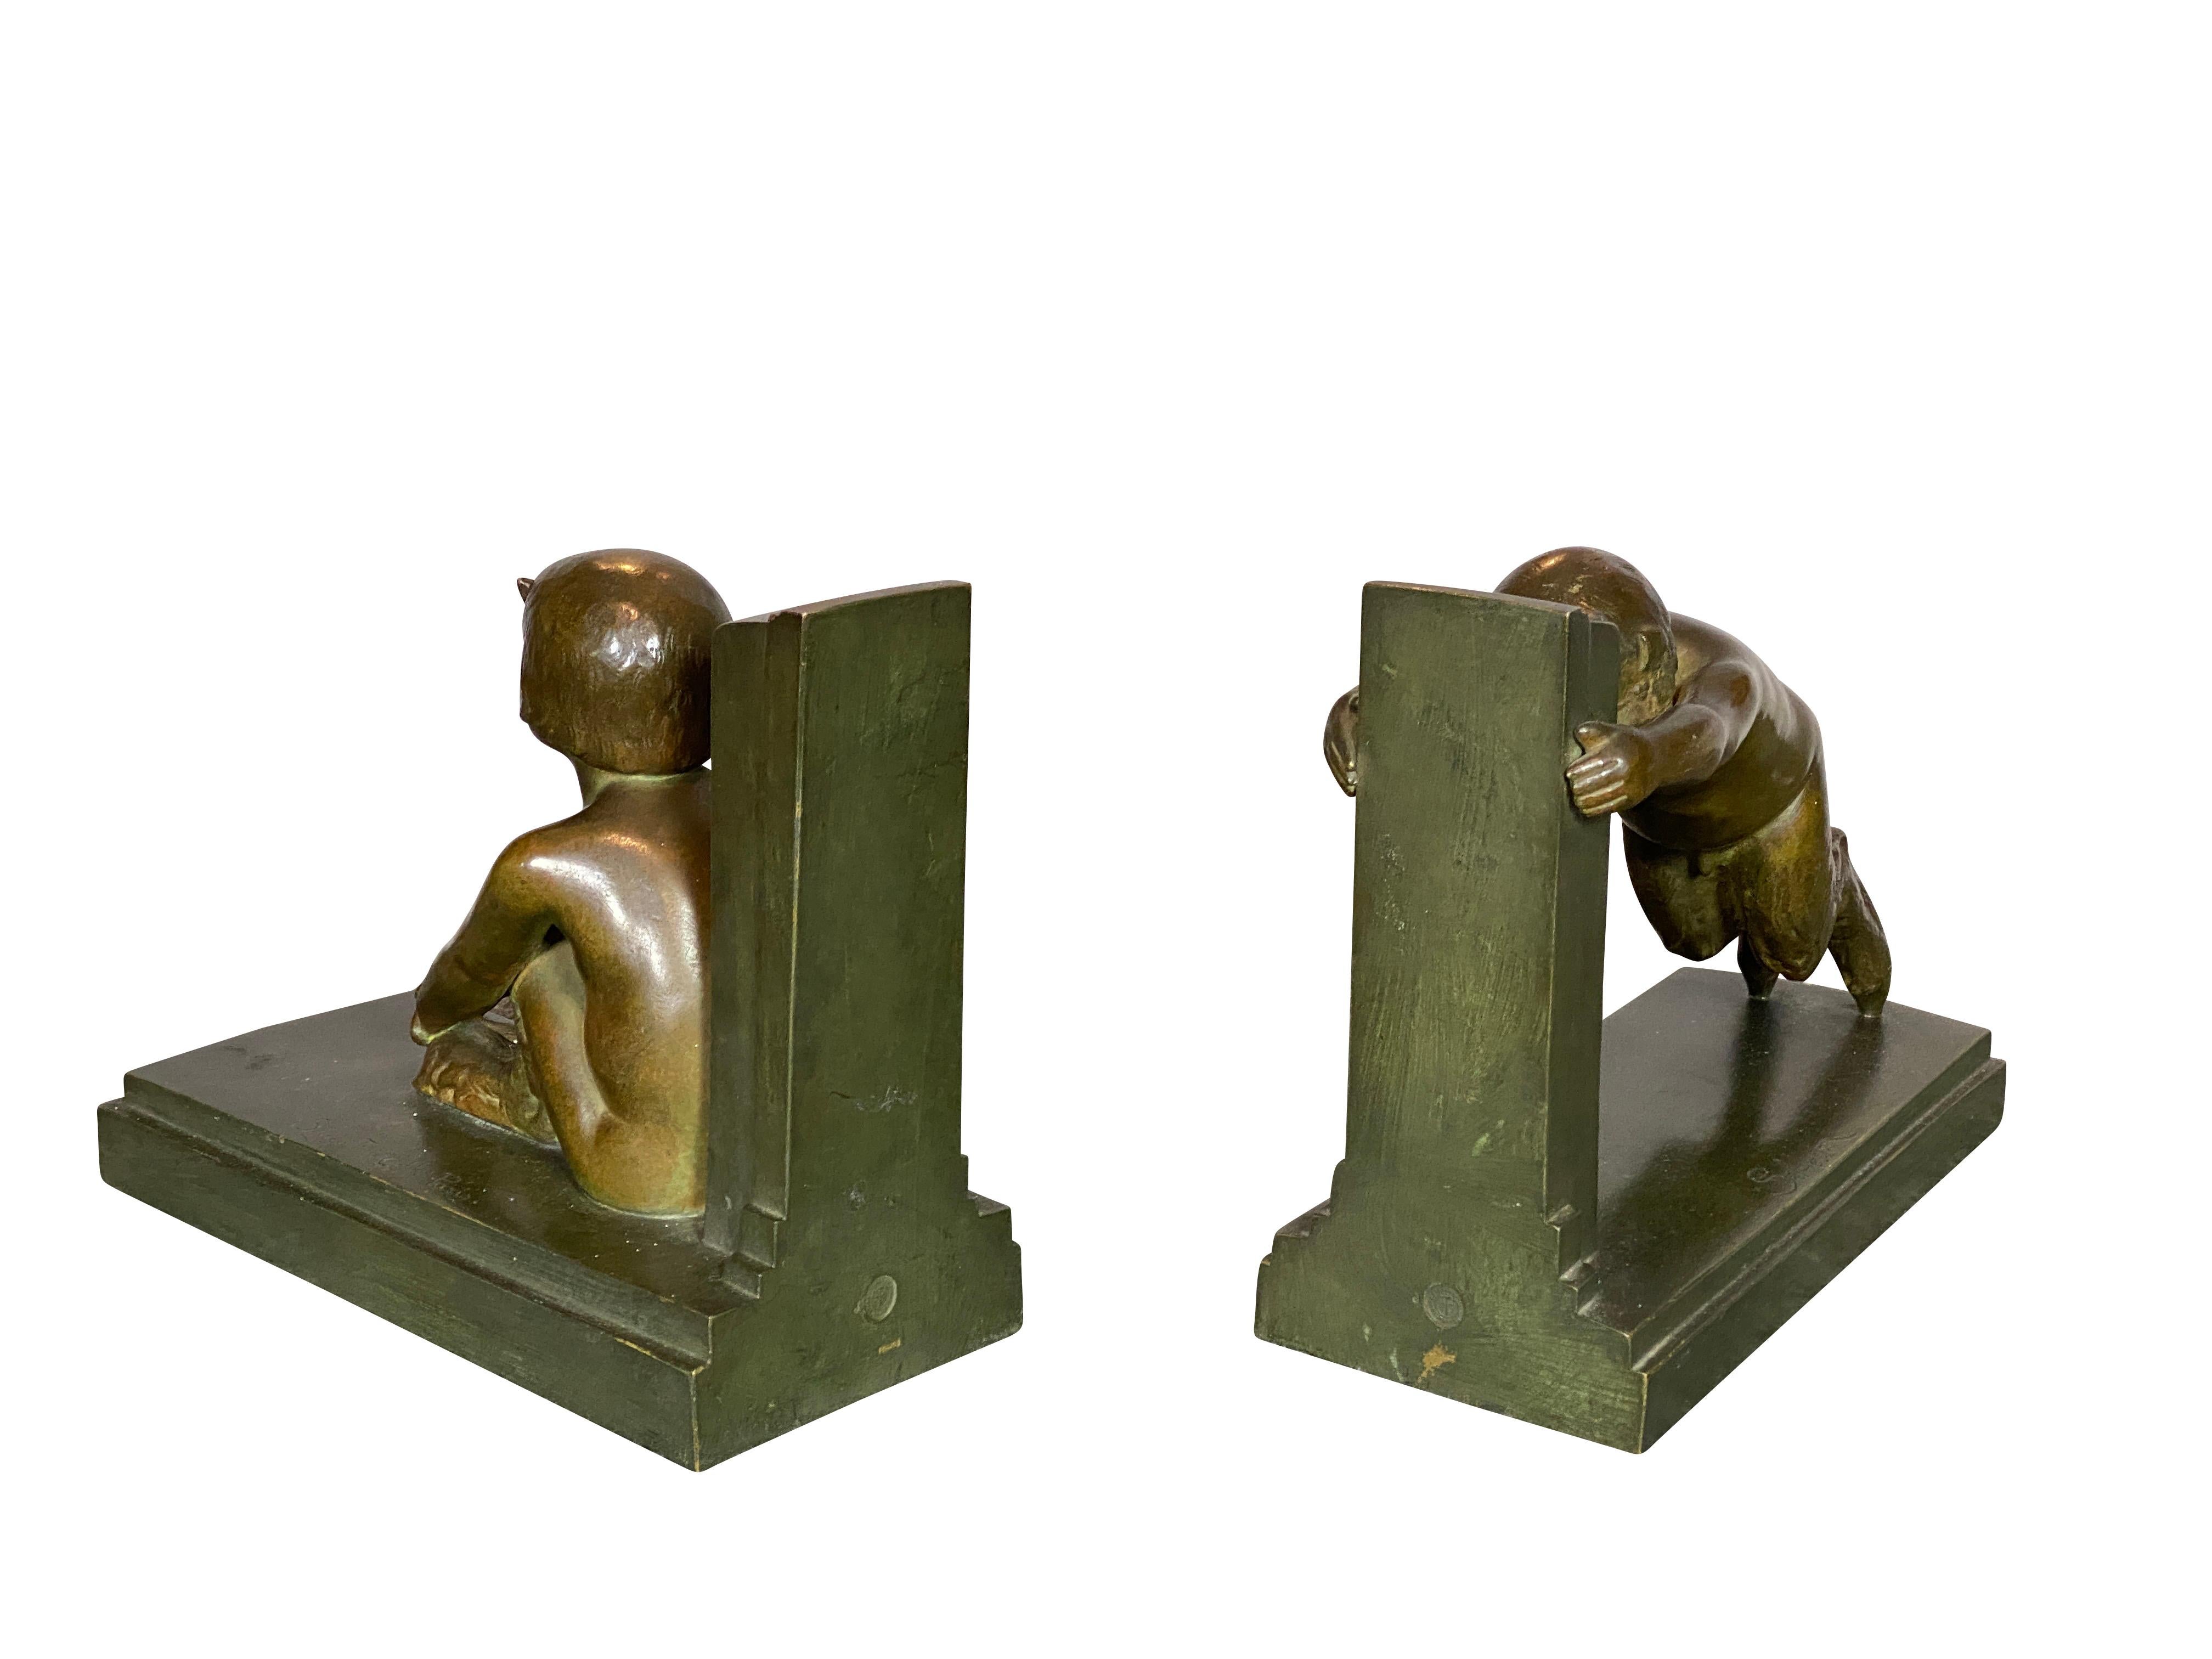 With Susse Freres foundry and signed, depicting a pair of satyr children one sitting and one standing and leaning. Greenish brown patina. Reduced version of the 